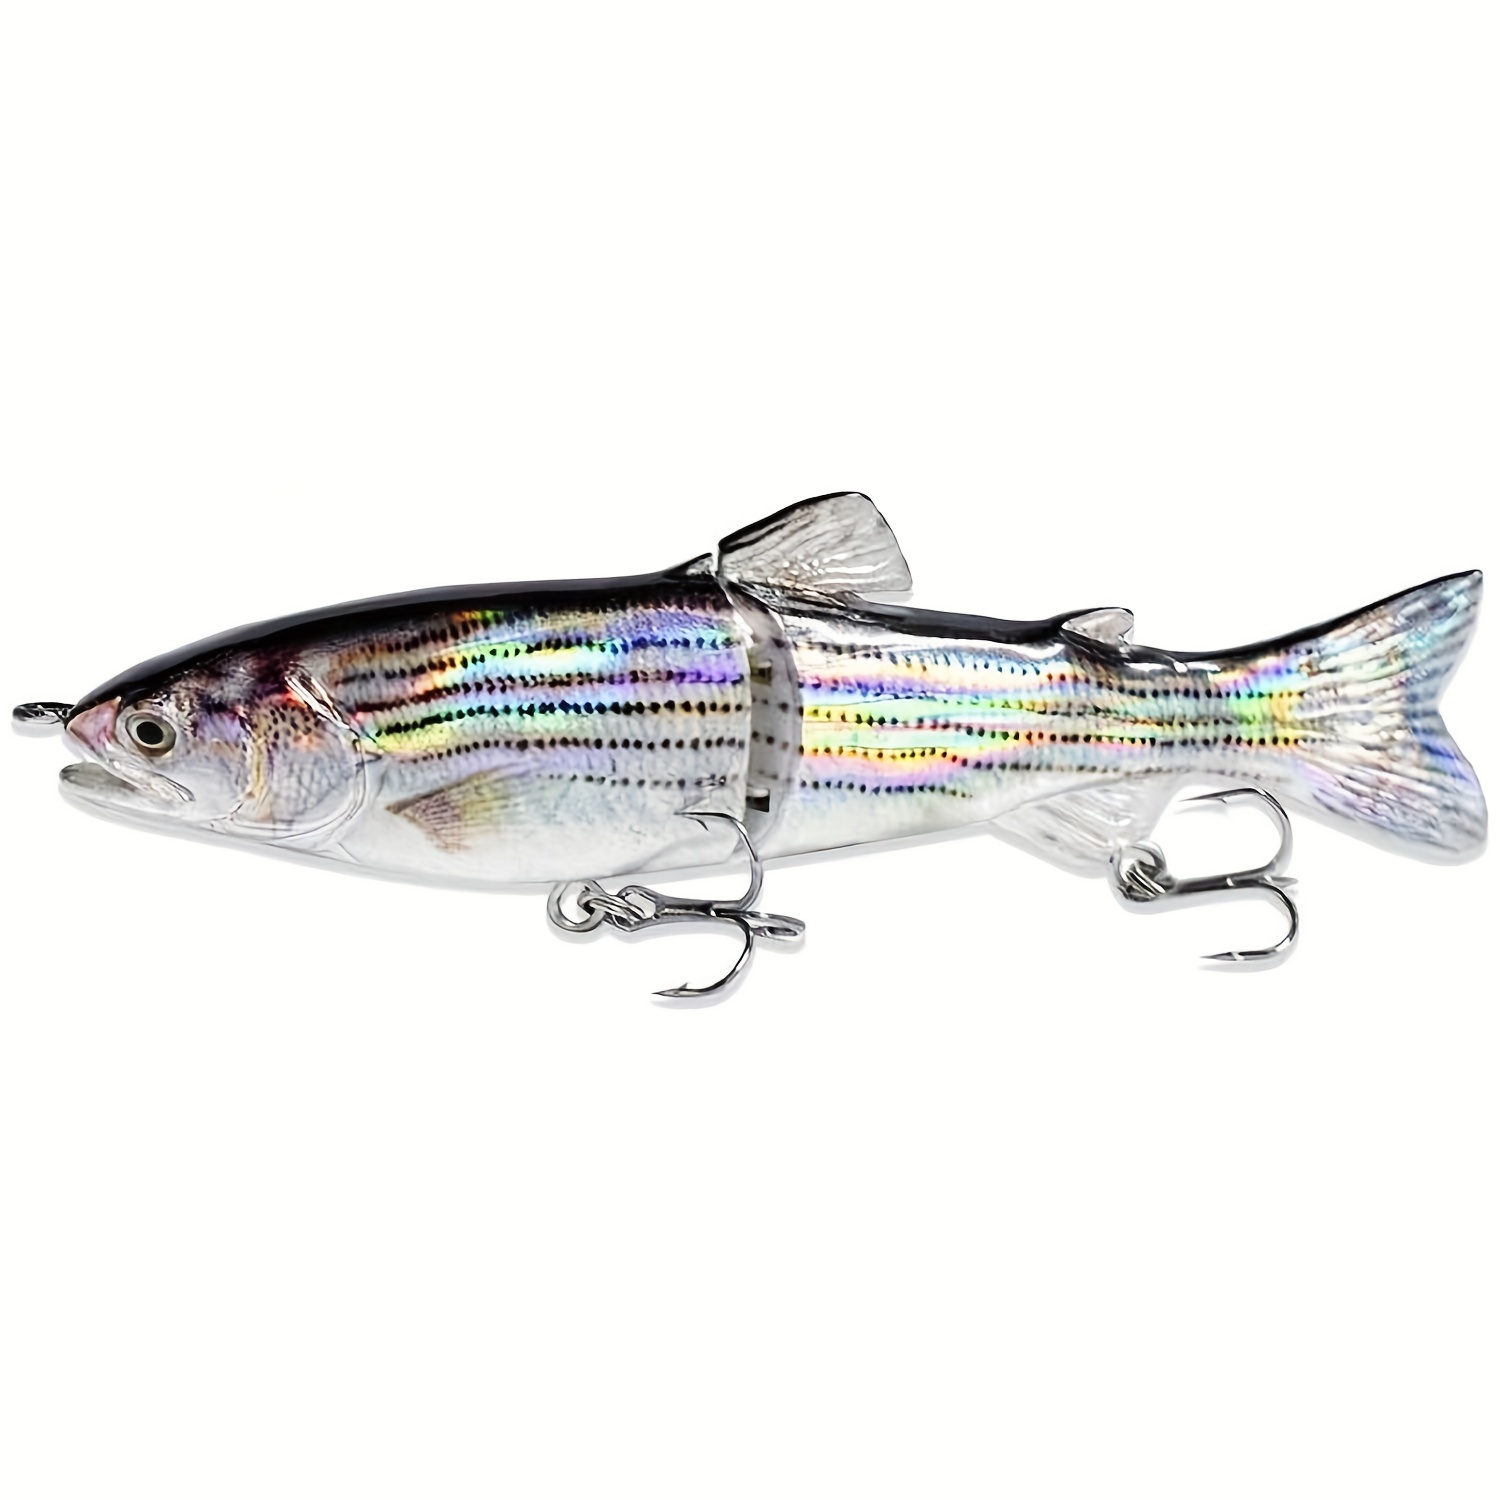 J5 premium baitfish swimbait - action and rigging - Swimbaits for bass  walleye and all types of fish 